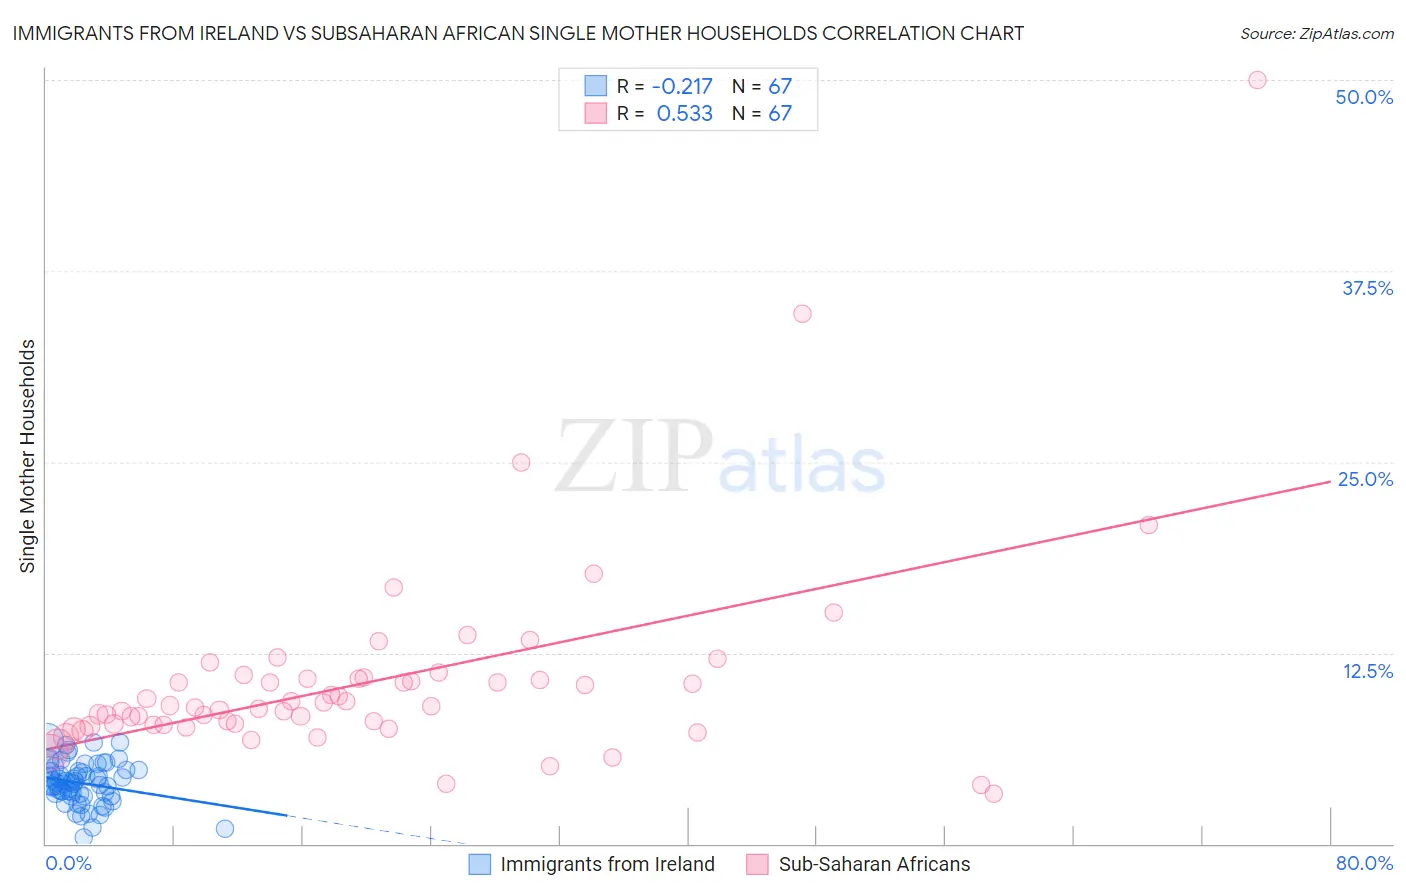 Immigrants from Ireland vs Subsaharan African Single Mother Households